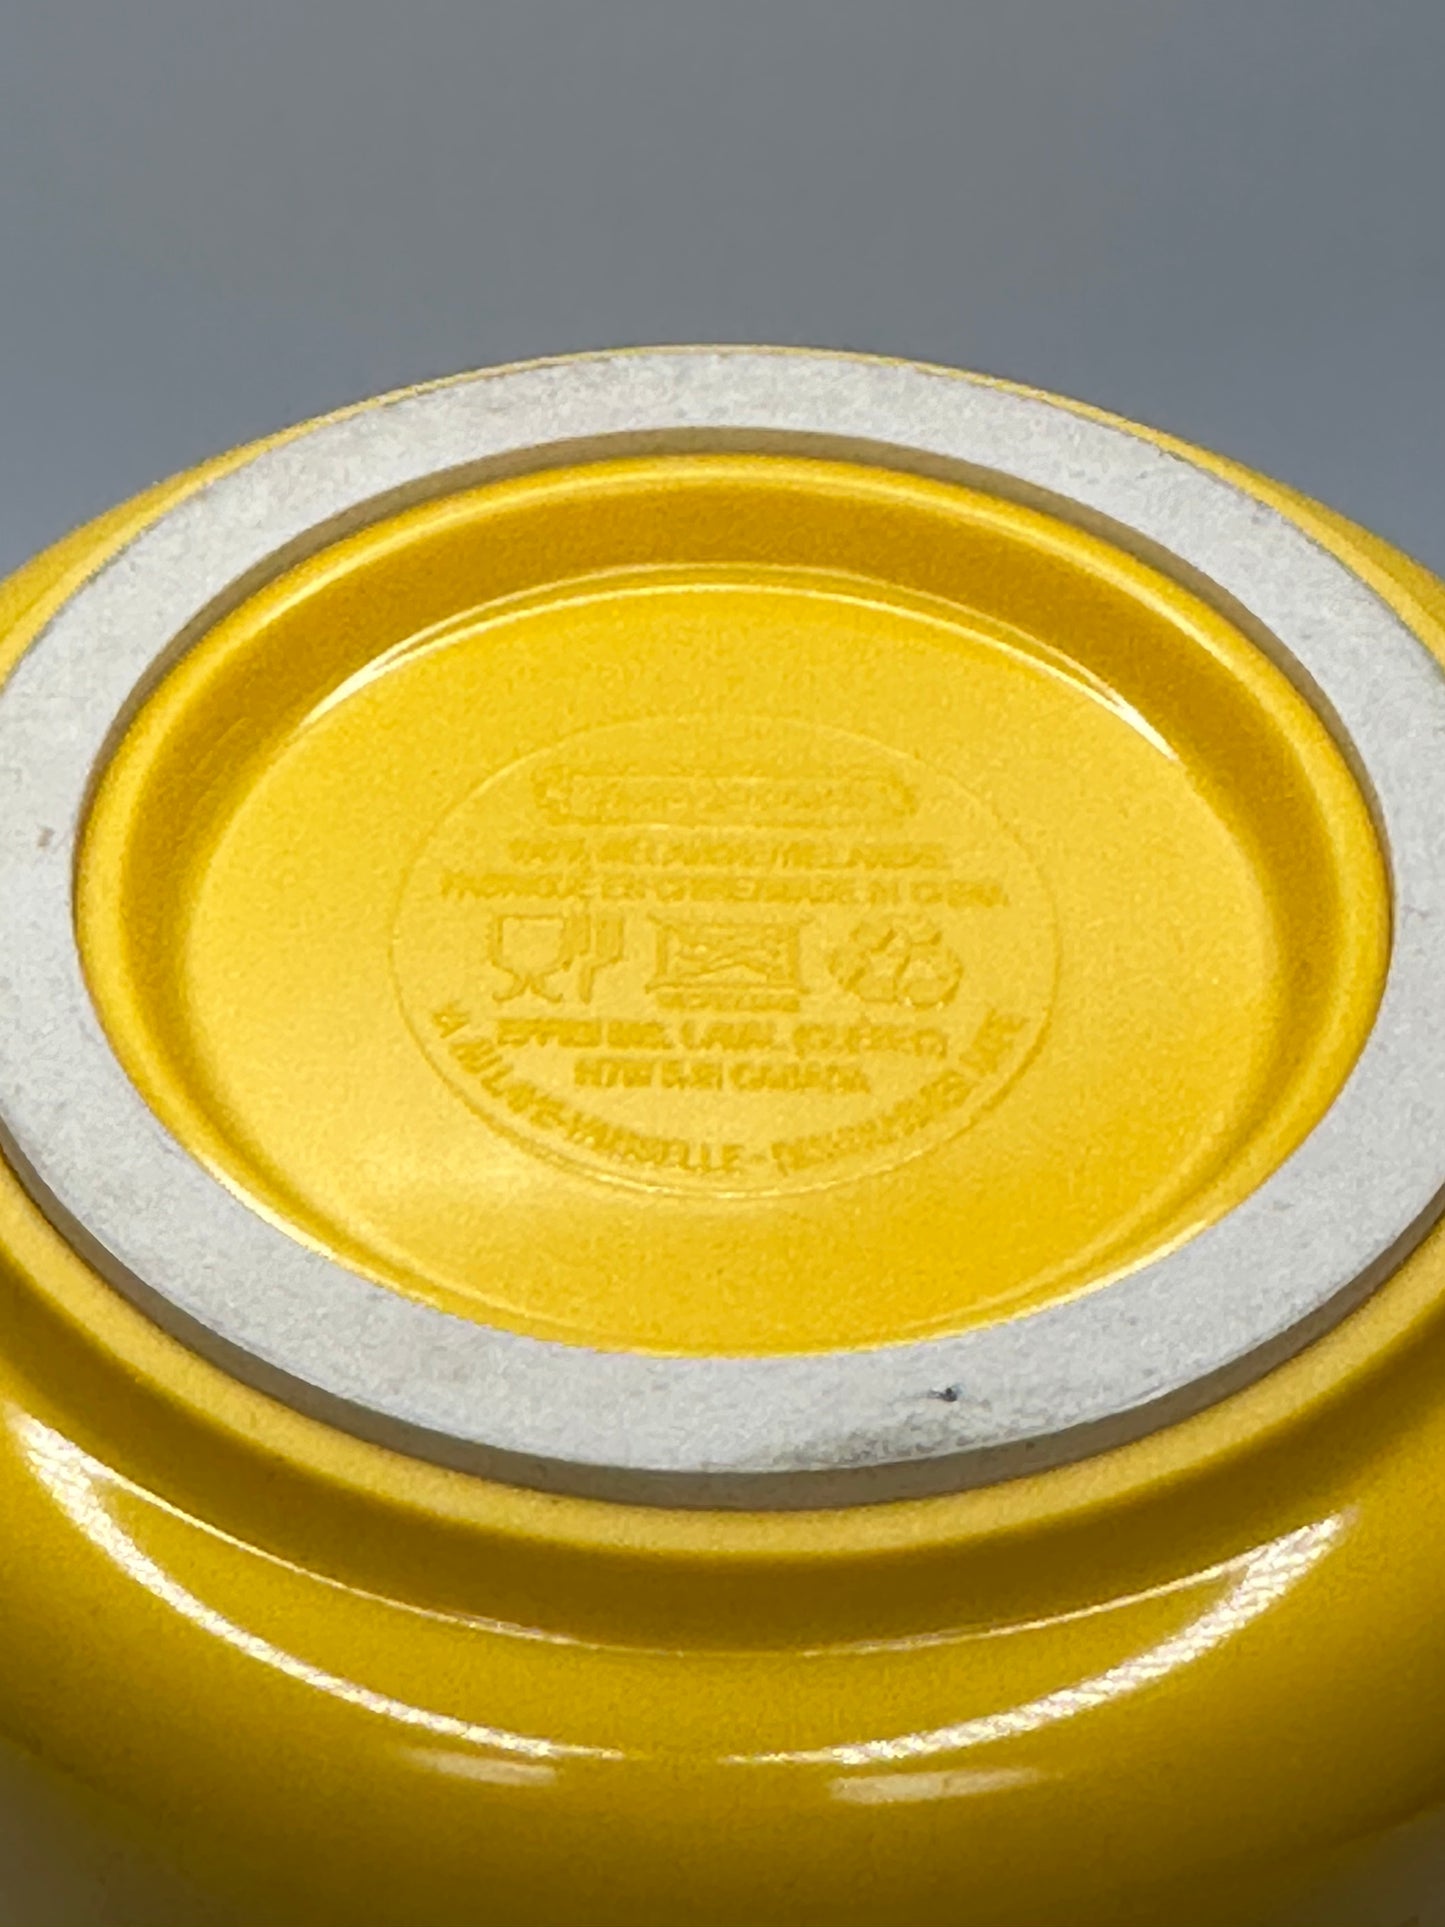 Rosti Cookware - utility container - Yellow